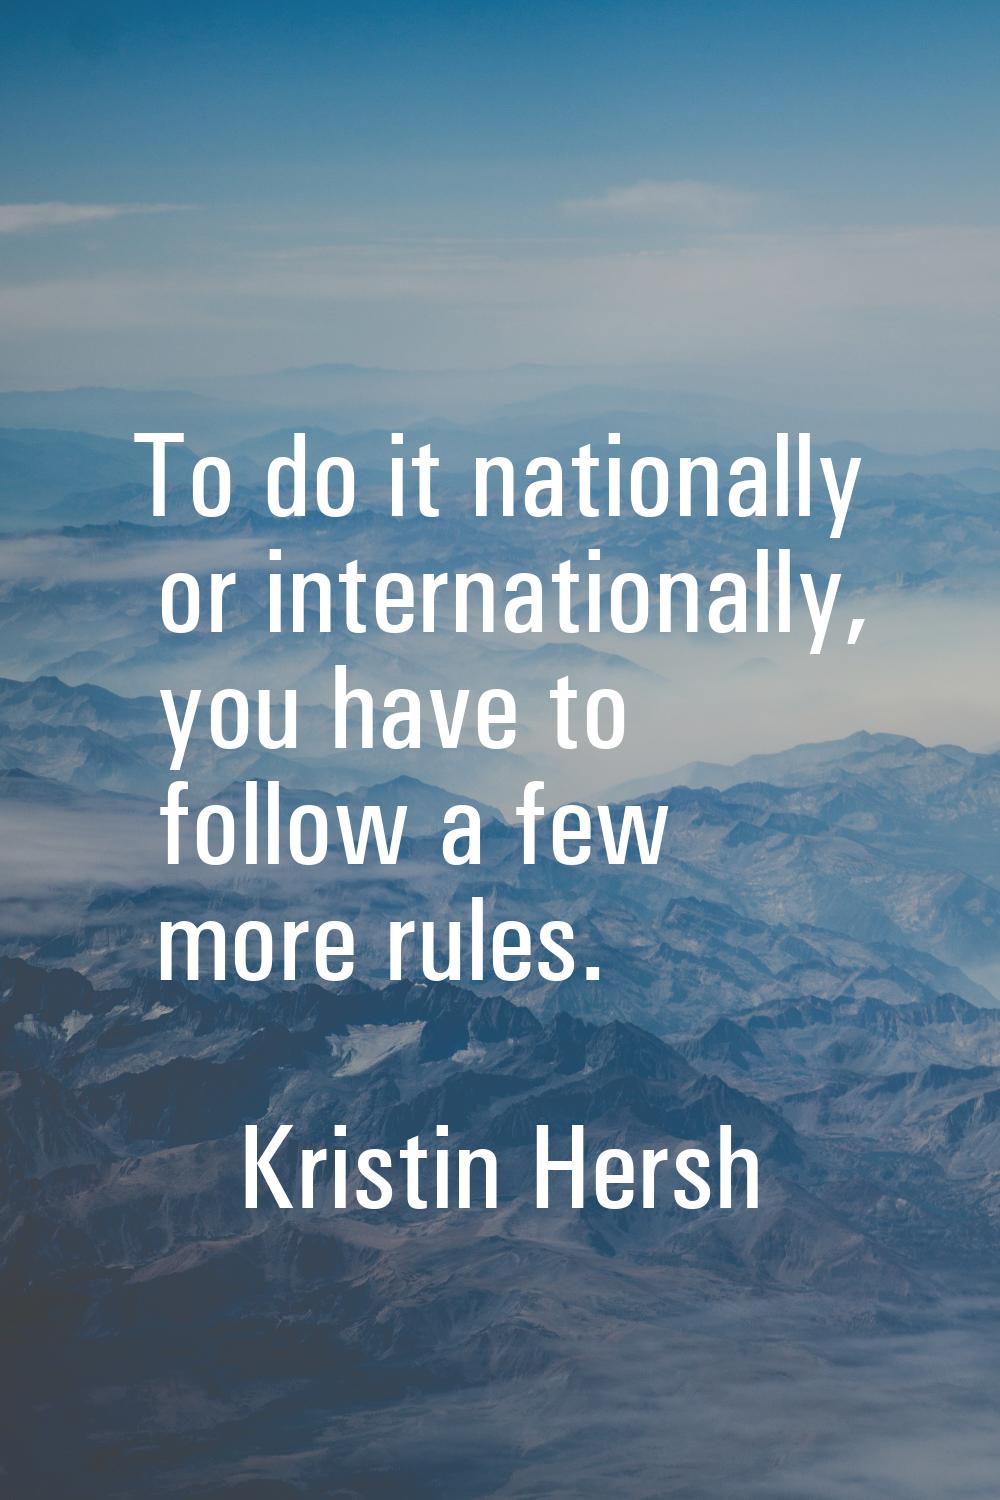 To do it nationally or internationally, you have to follow a few more rules.